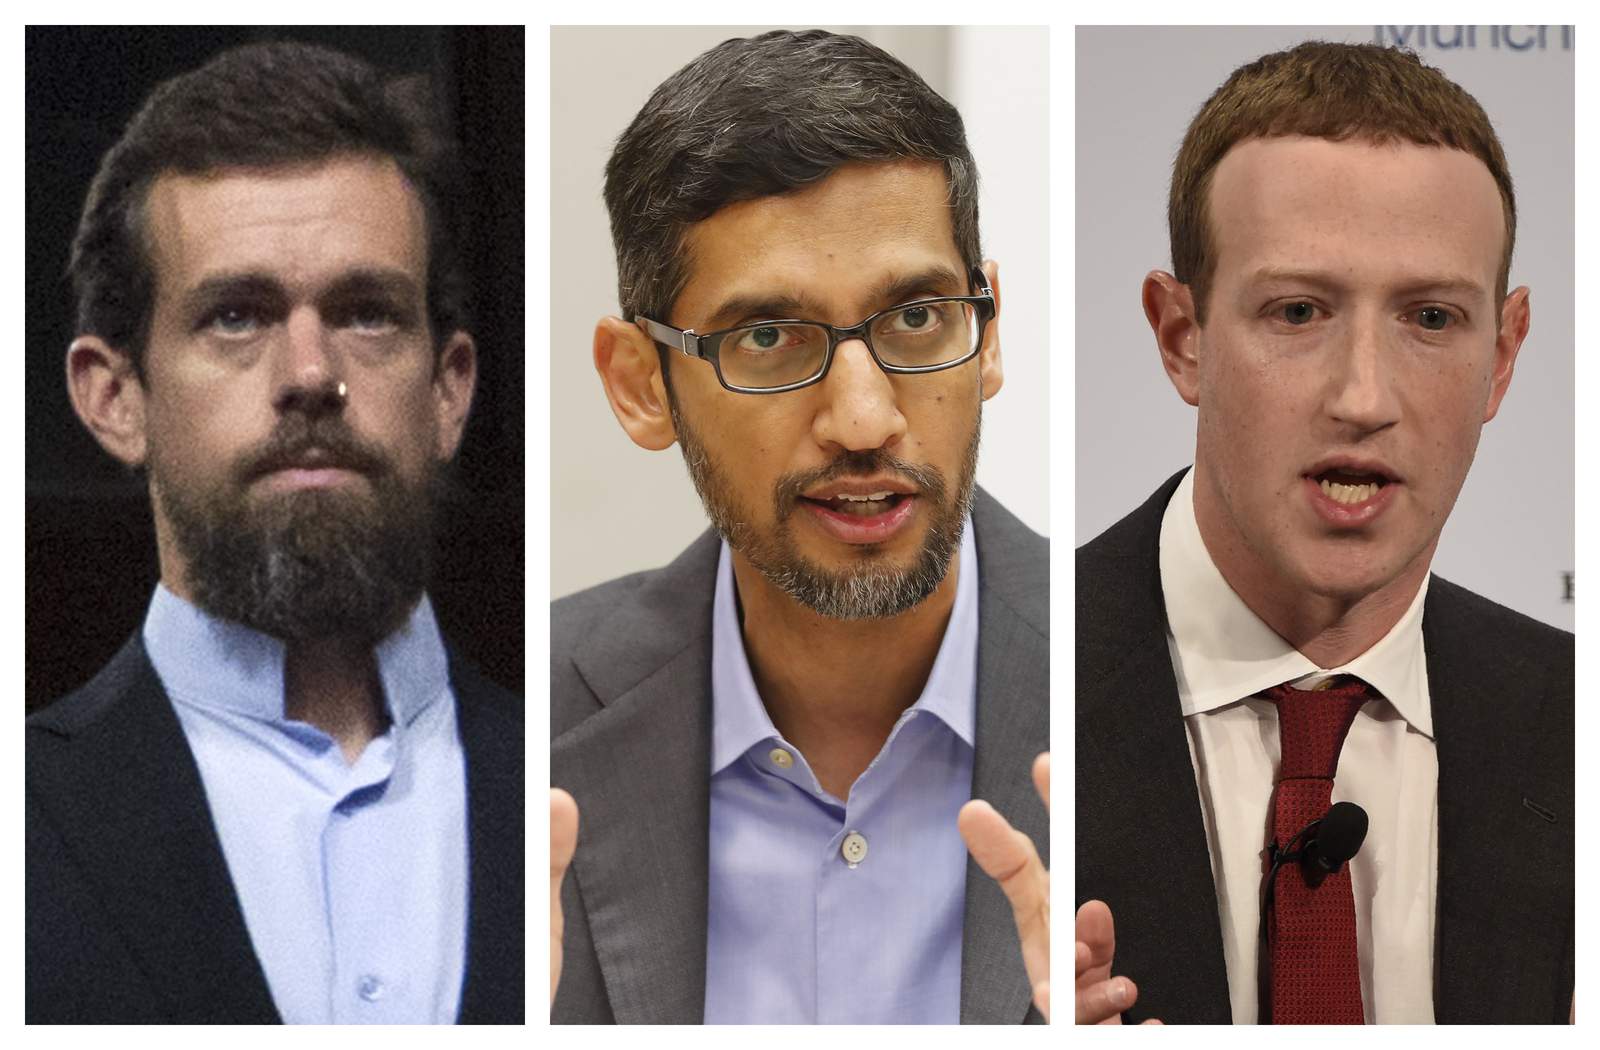 CEOs of 3 tech giants to testify at Oct. 28 Senate hearing